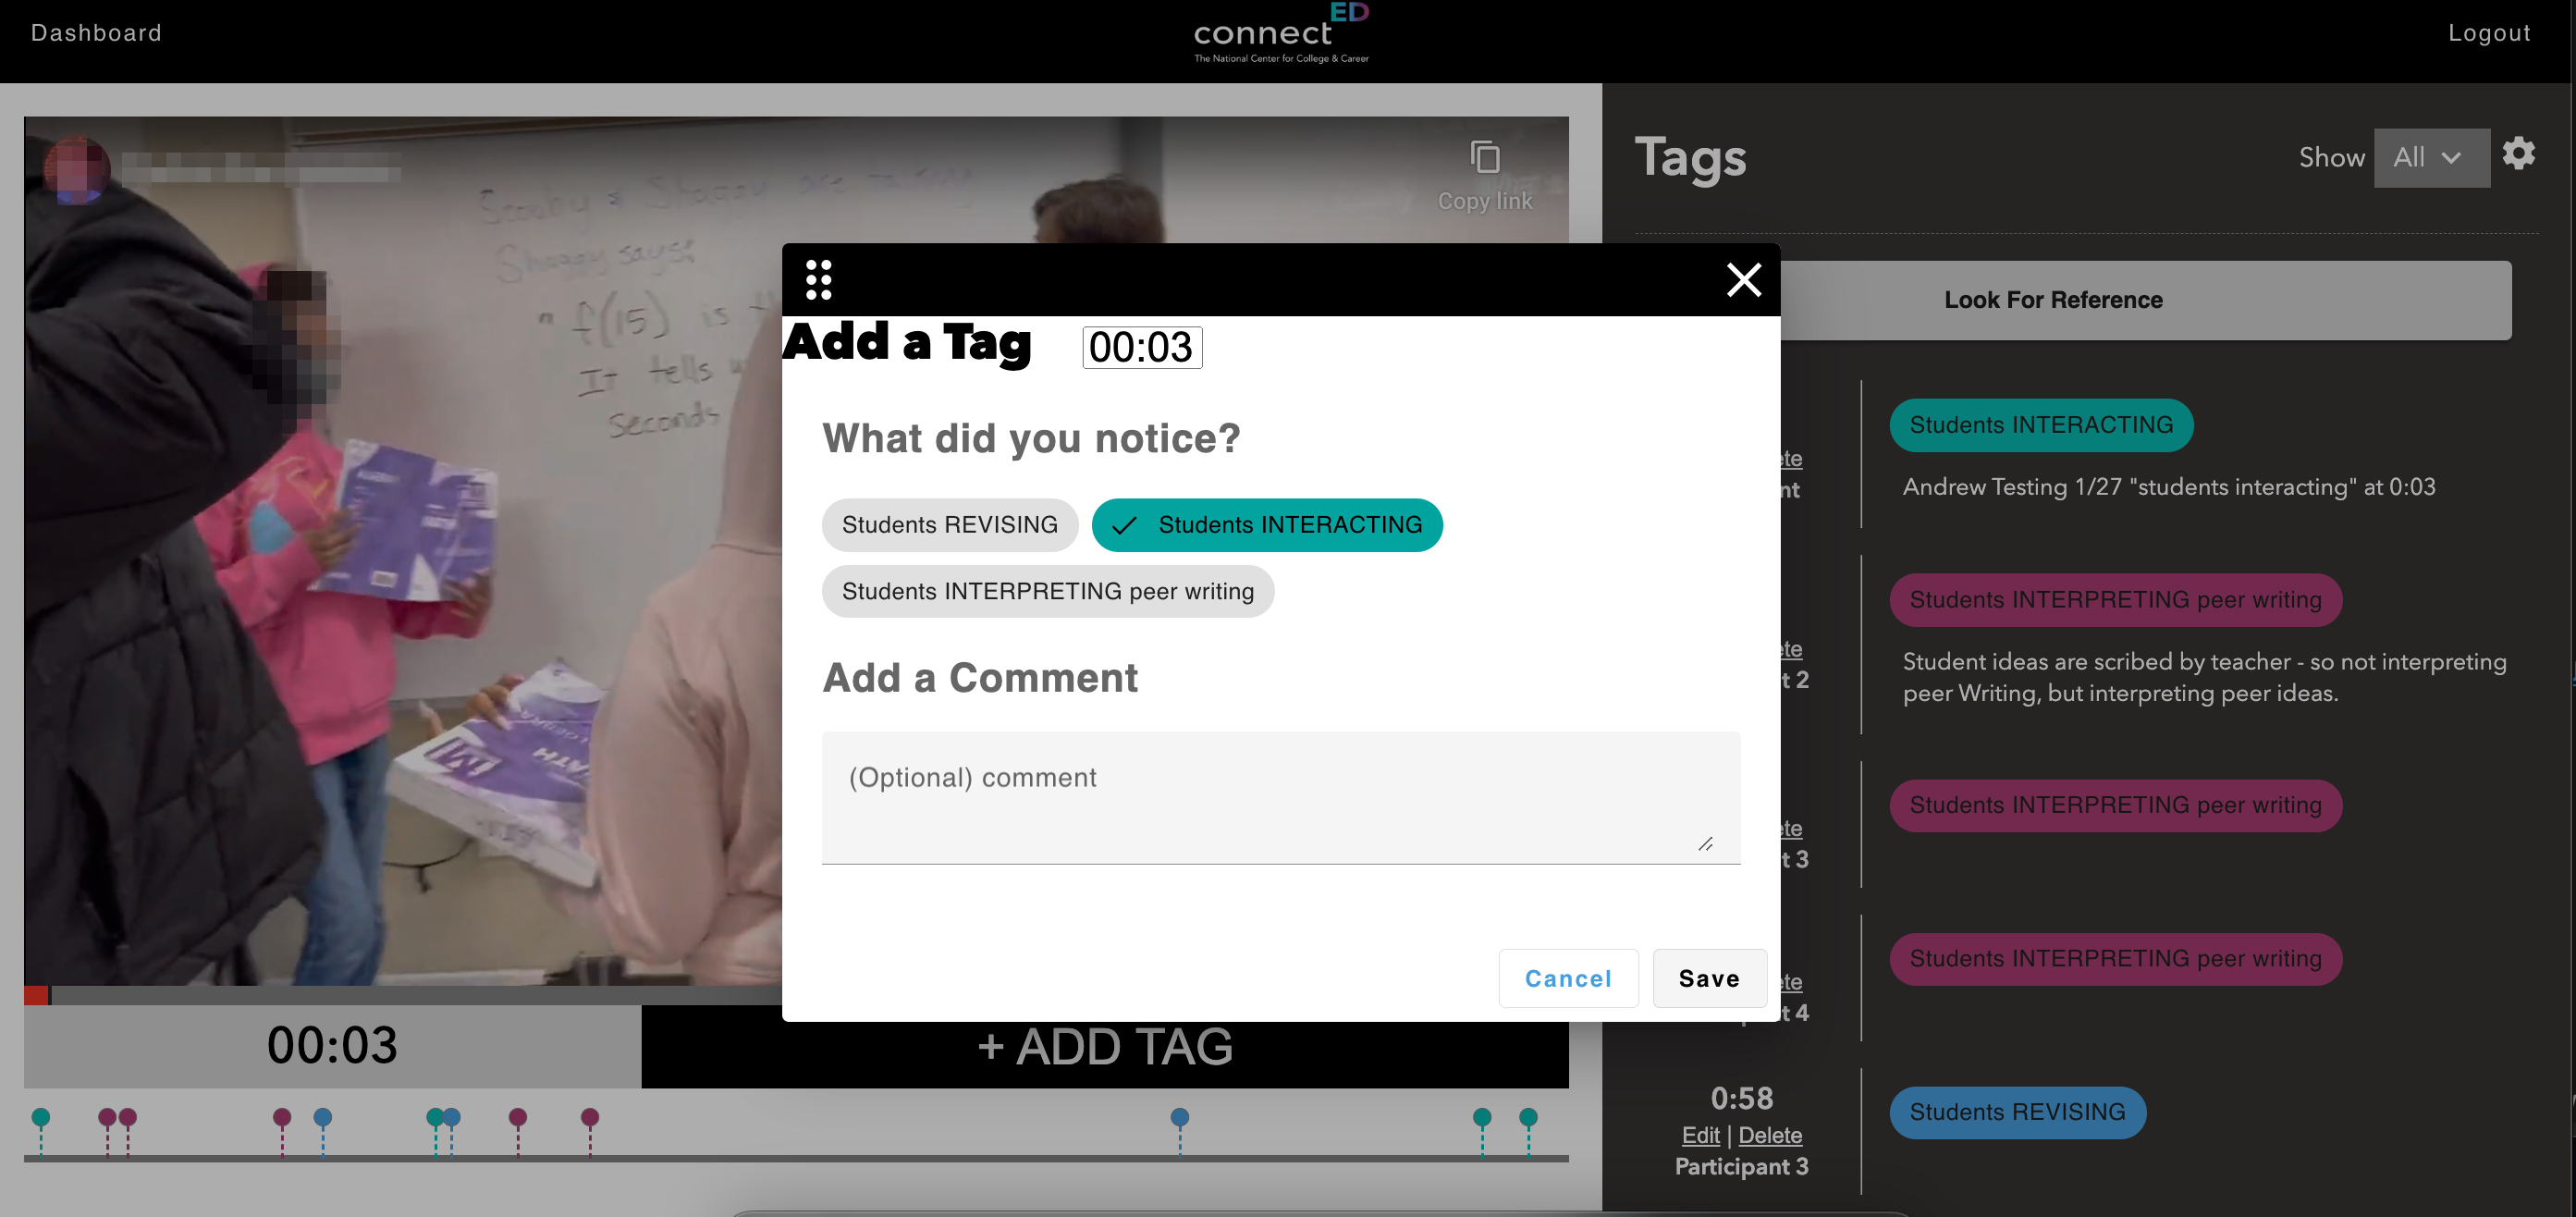 demonstration of tagging in the rewindED tool. User is selecting that they noticed students interacting, other options are shown as well as a comment field.